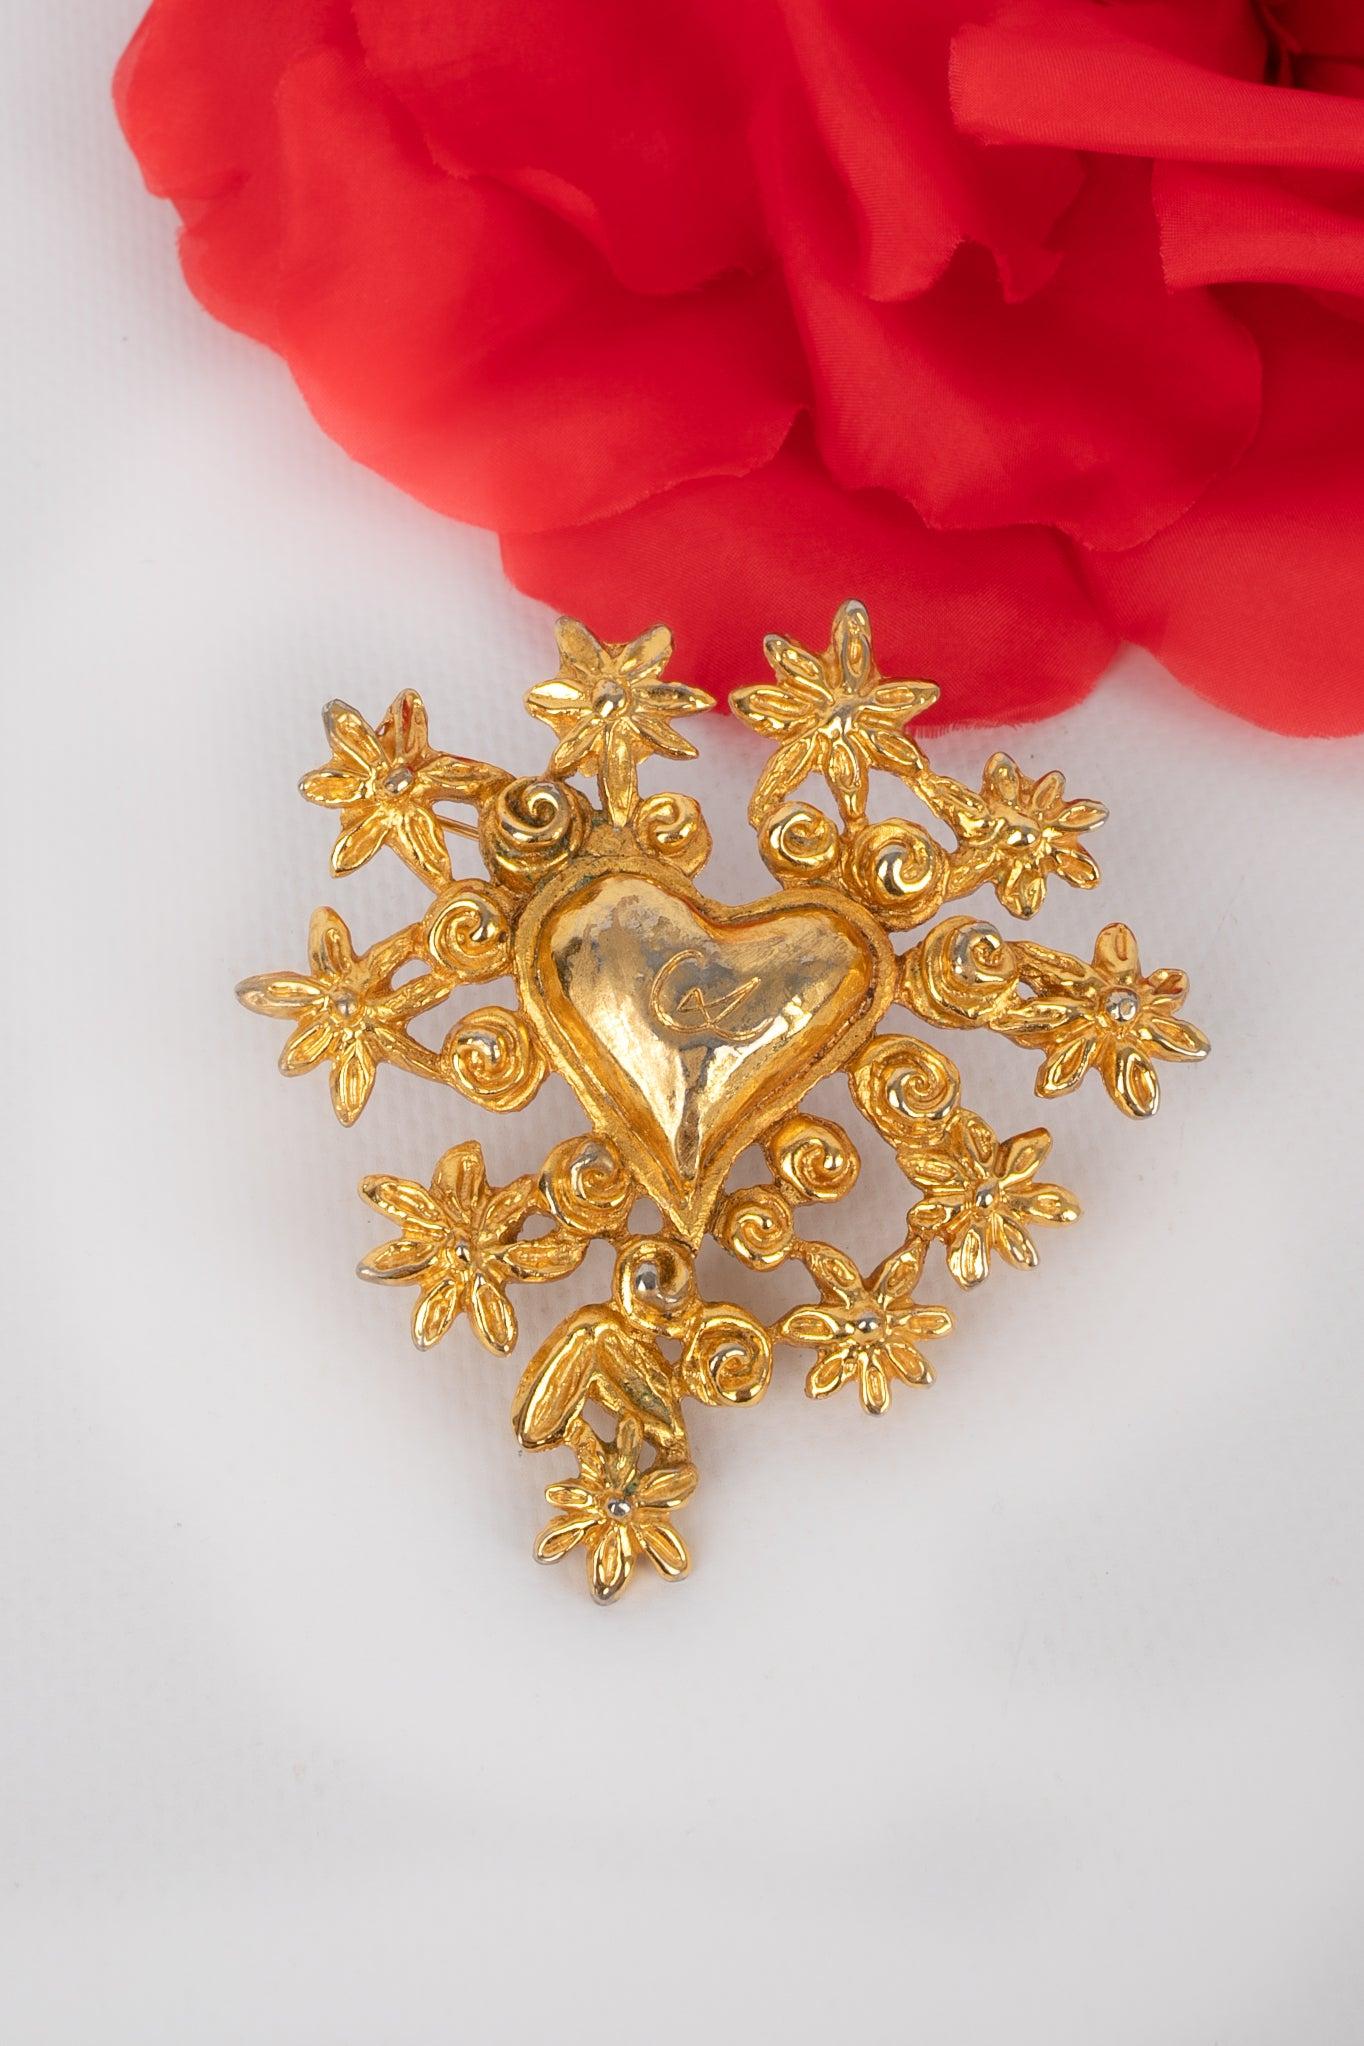 Christian Lacroix Heart Brooch, 1993 For Sale 2